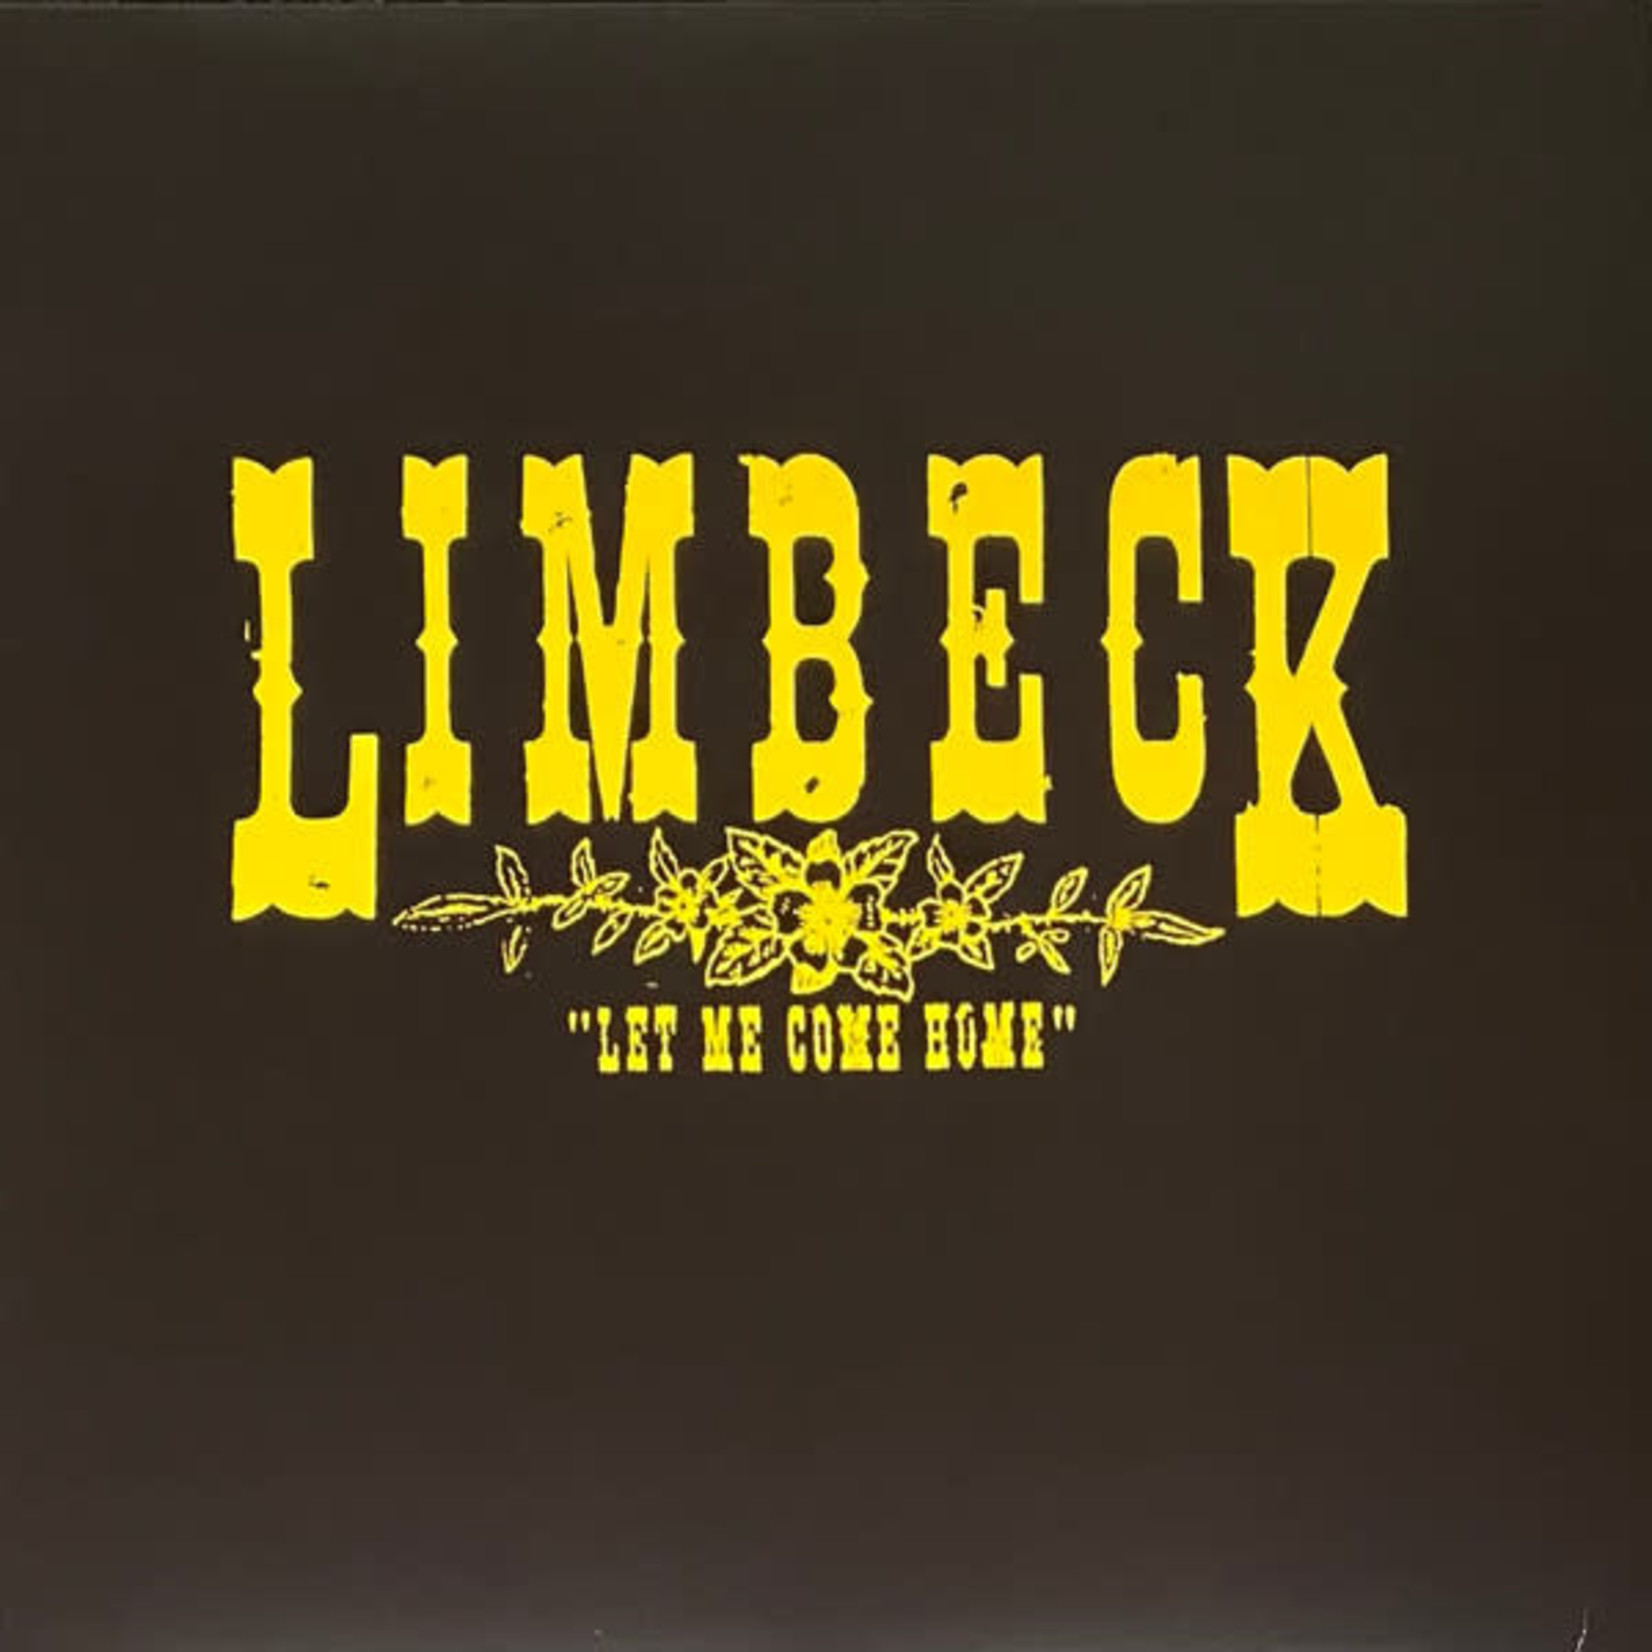 Doghouse Limbeck - Let Me Come Home (LP+7") [Gray]